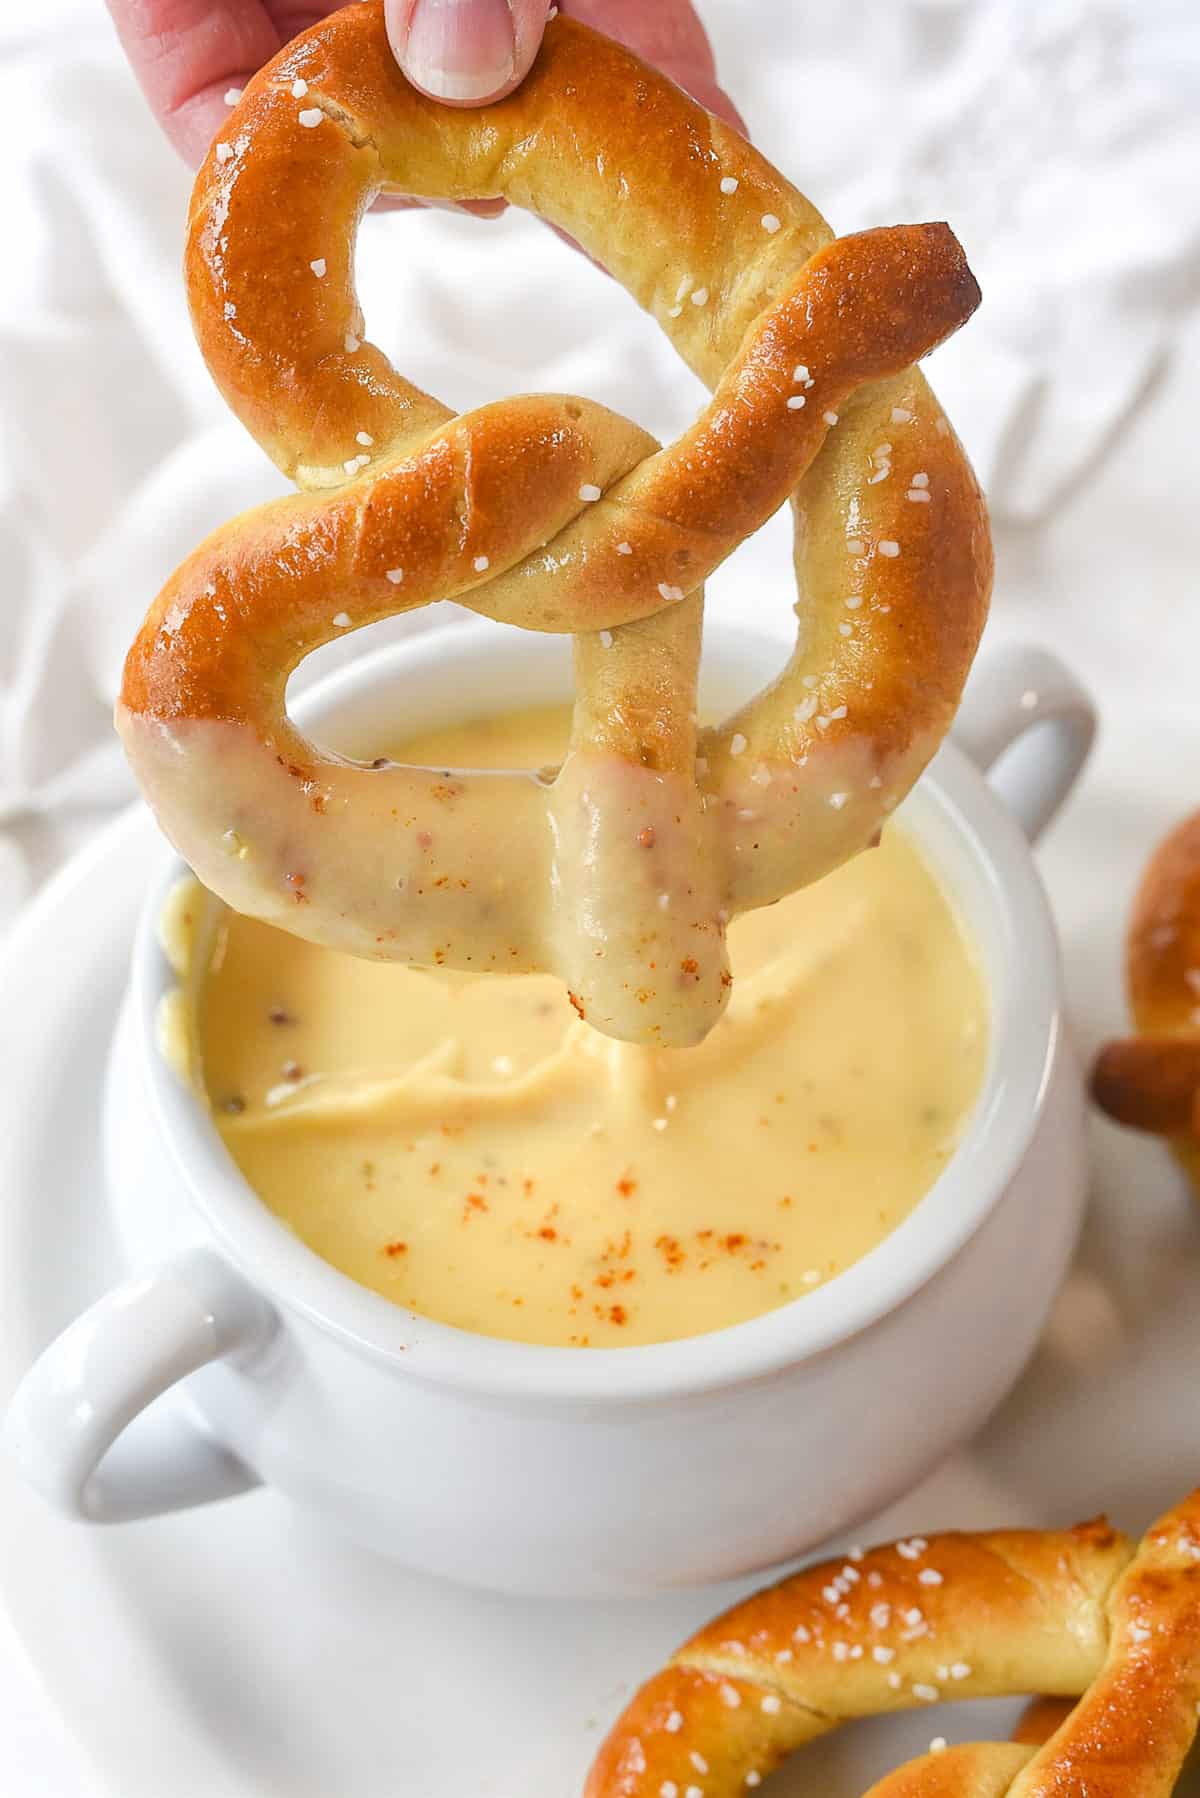 dipping pretzel in cheese sauce.